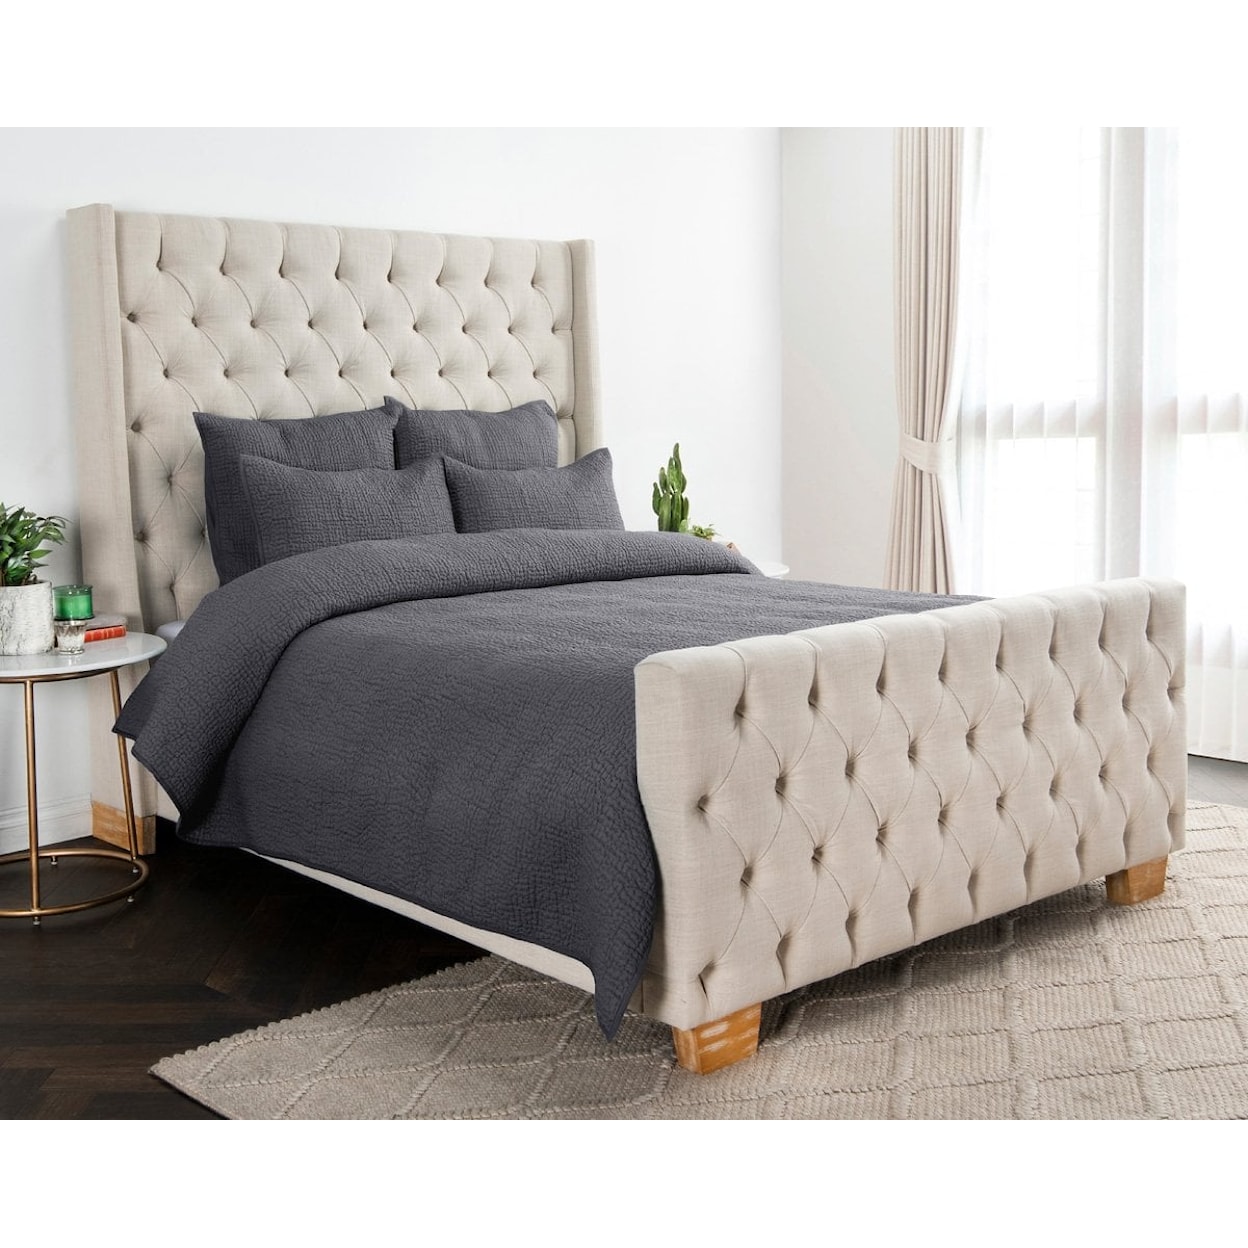 Classic Home Bedding DANICA CHARCAOL KING QUILT